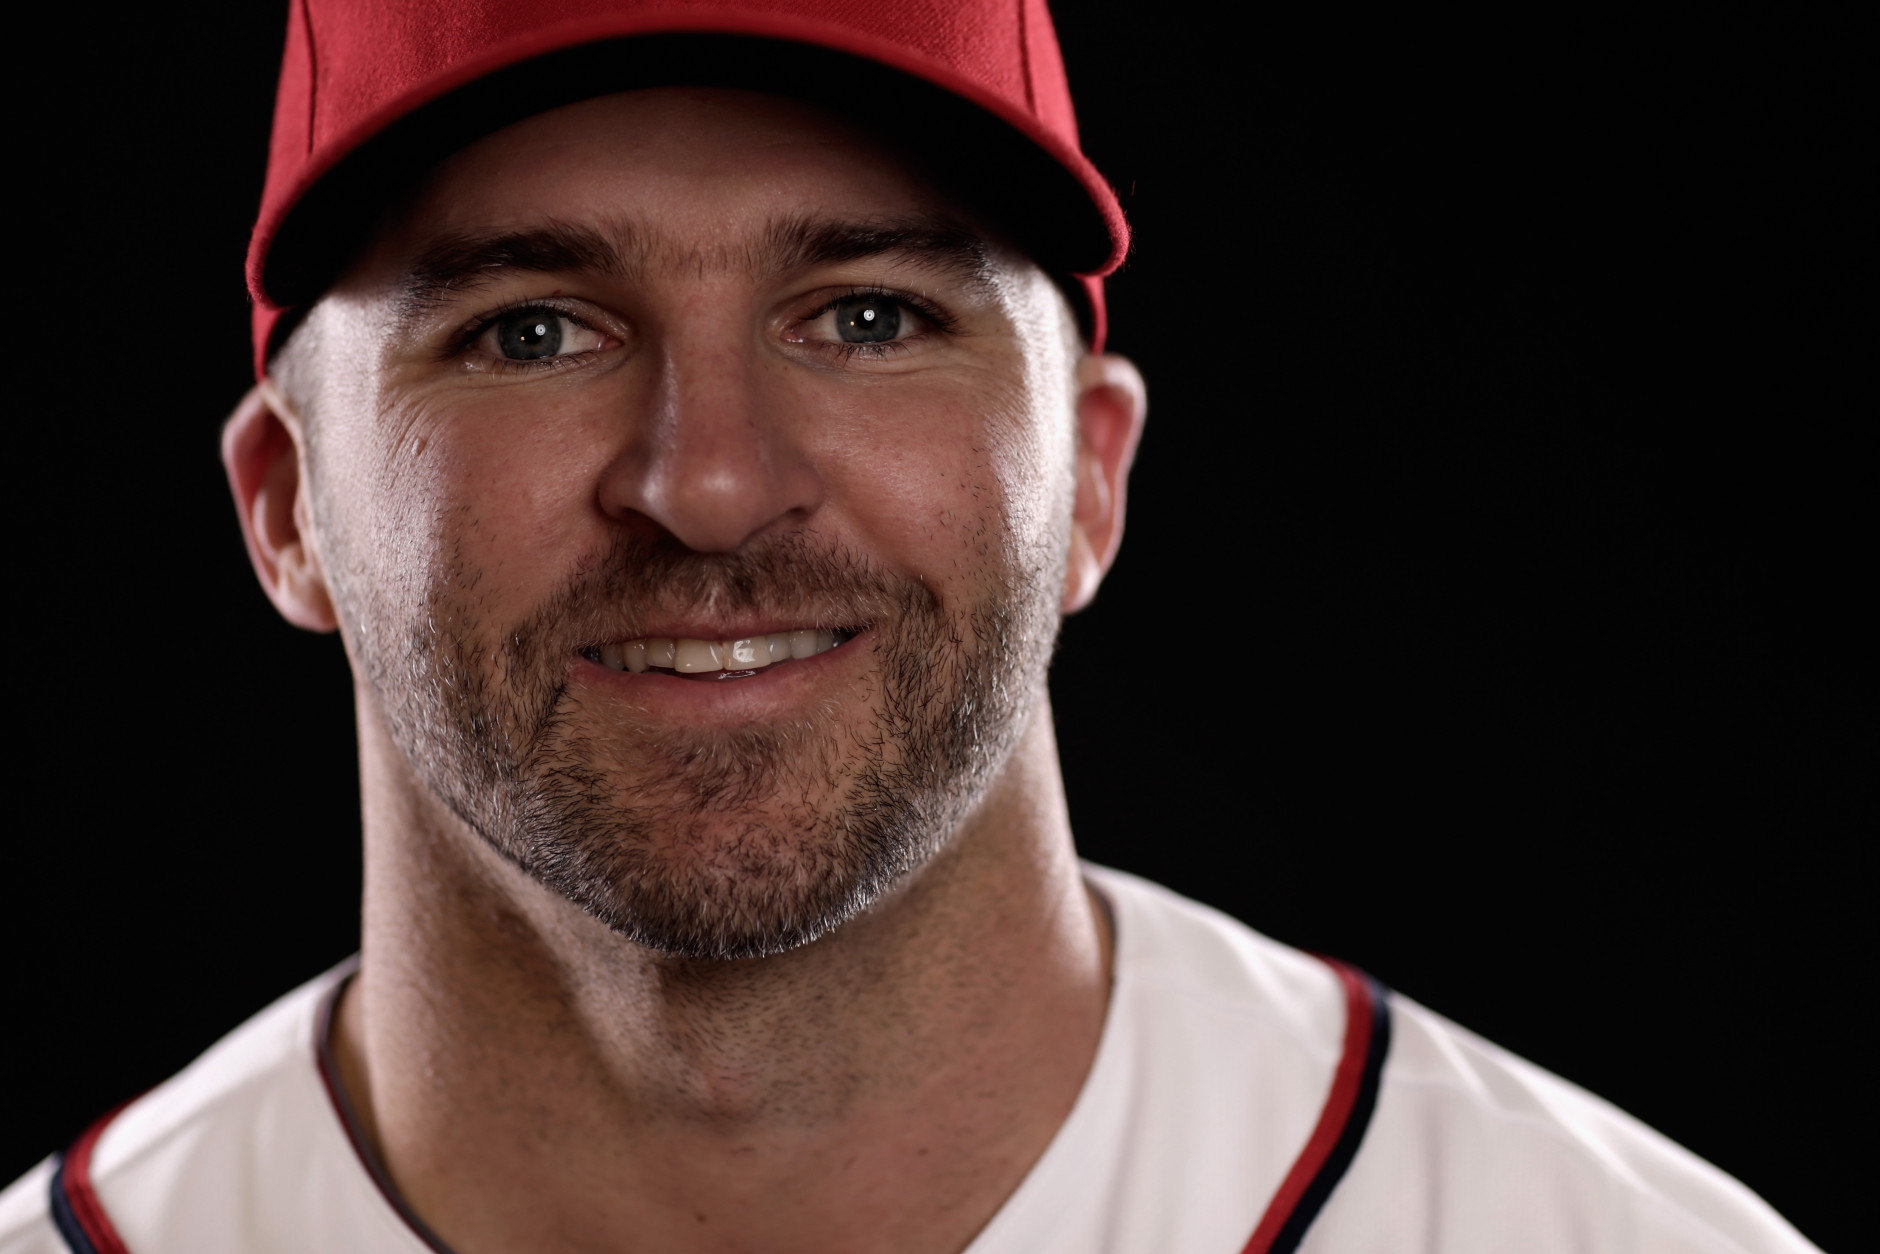 VIERA, FL - MARCH 01:  Dan Uggla #26 of the Washington Nationals poses for a portrait during photo day at Space Coast Stadium on March 1, 2015 in Viera, Florida.  (Photo by Chris Trotman/Getty Images)